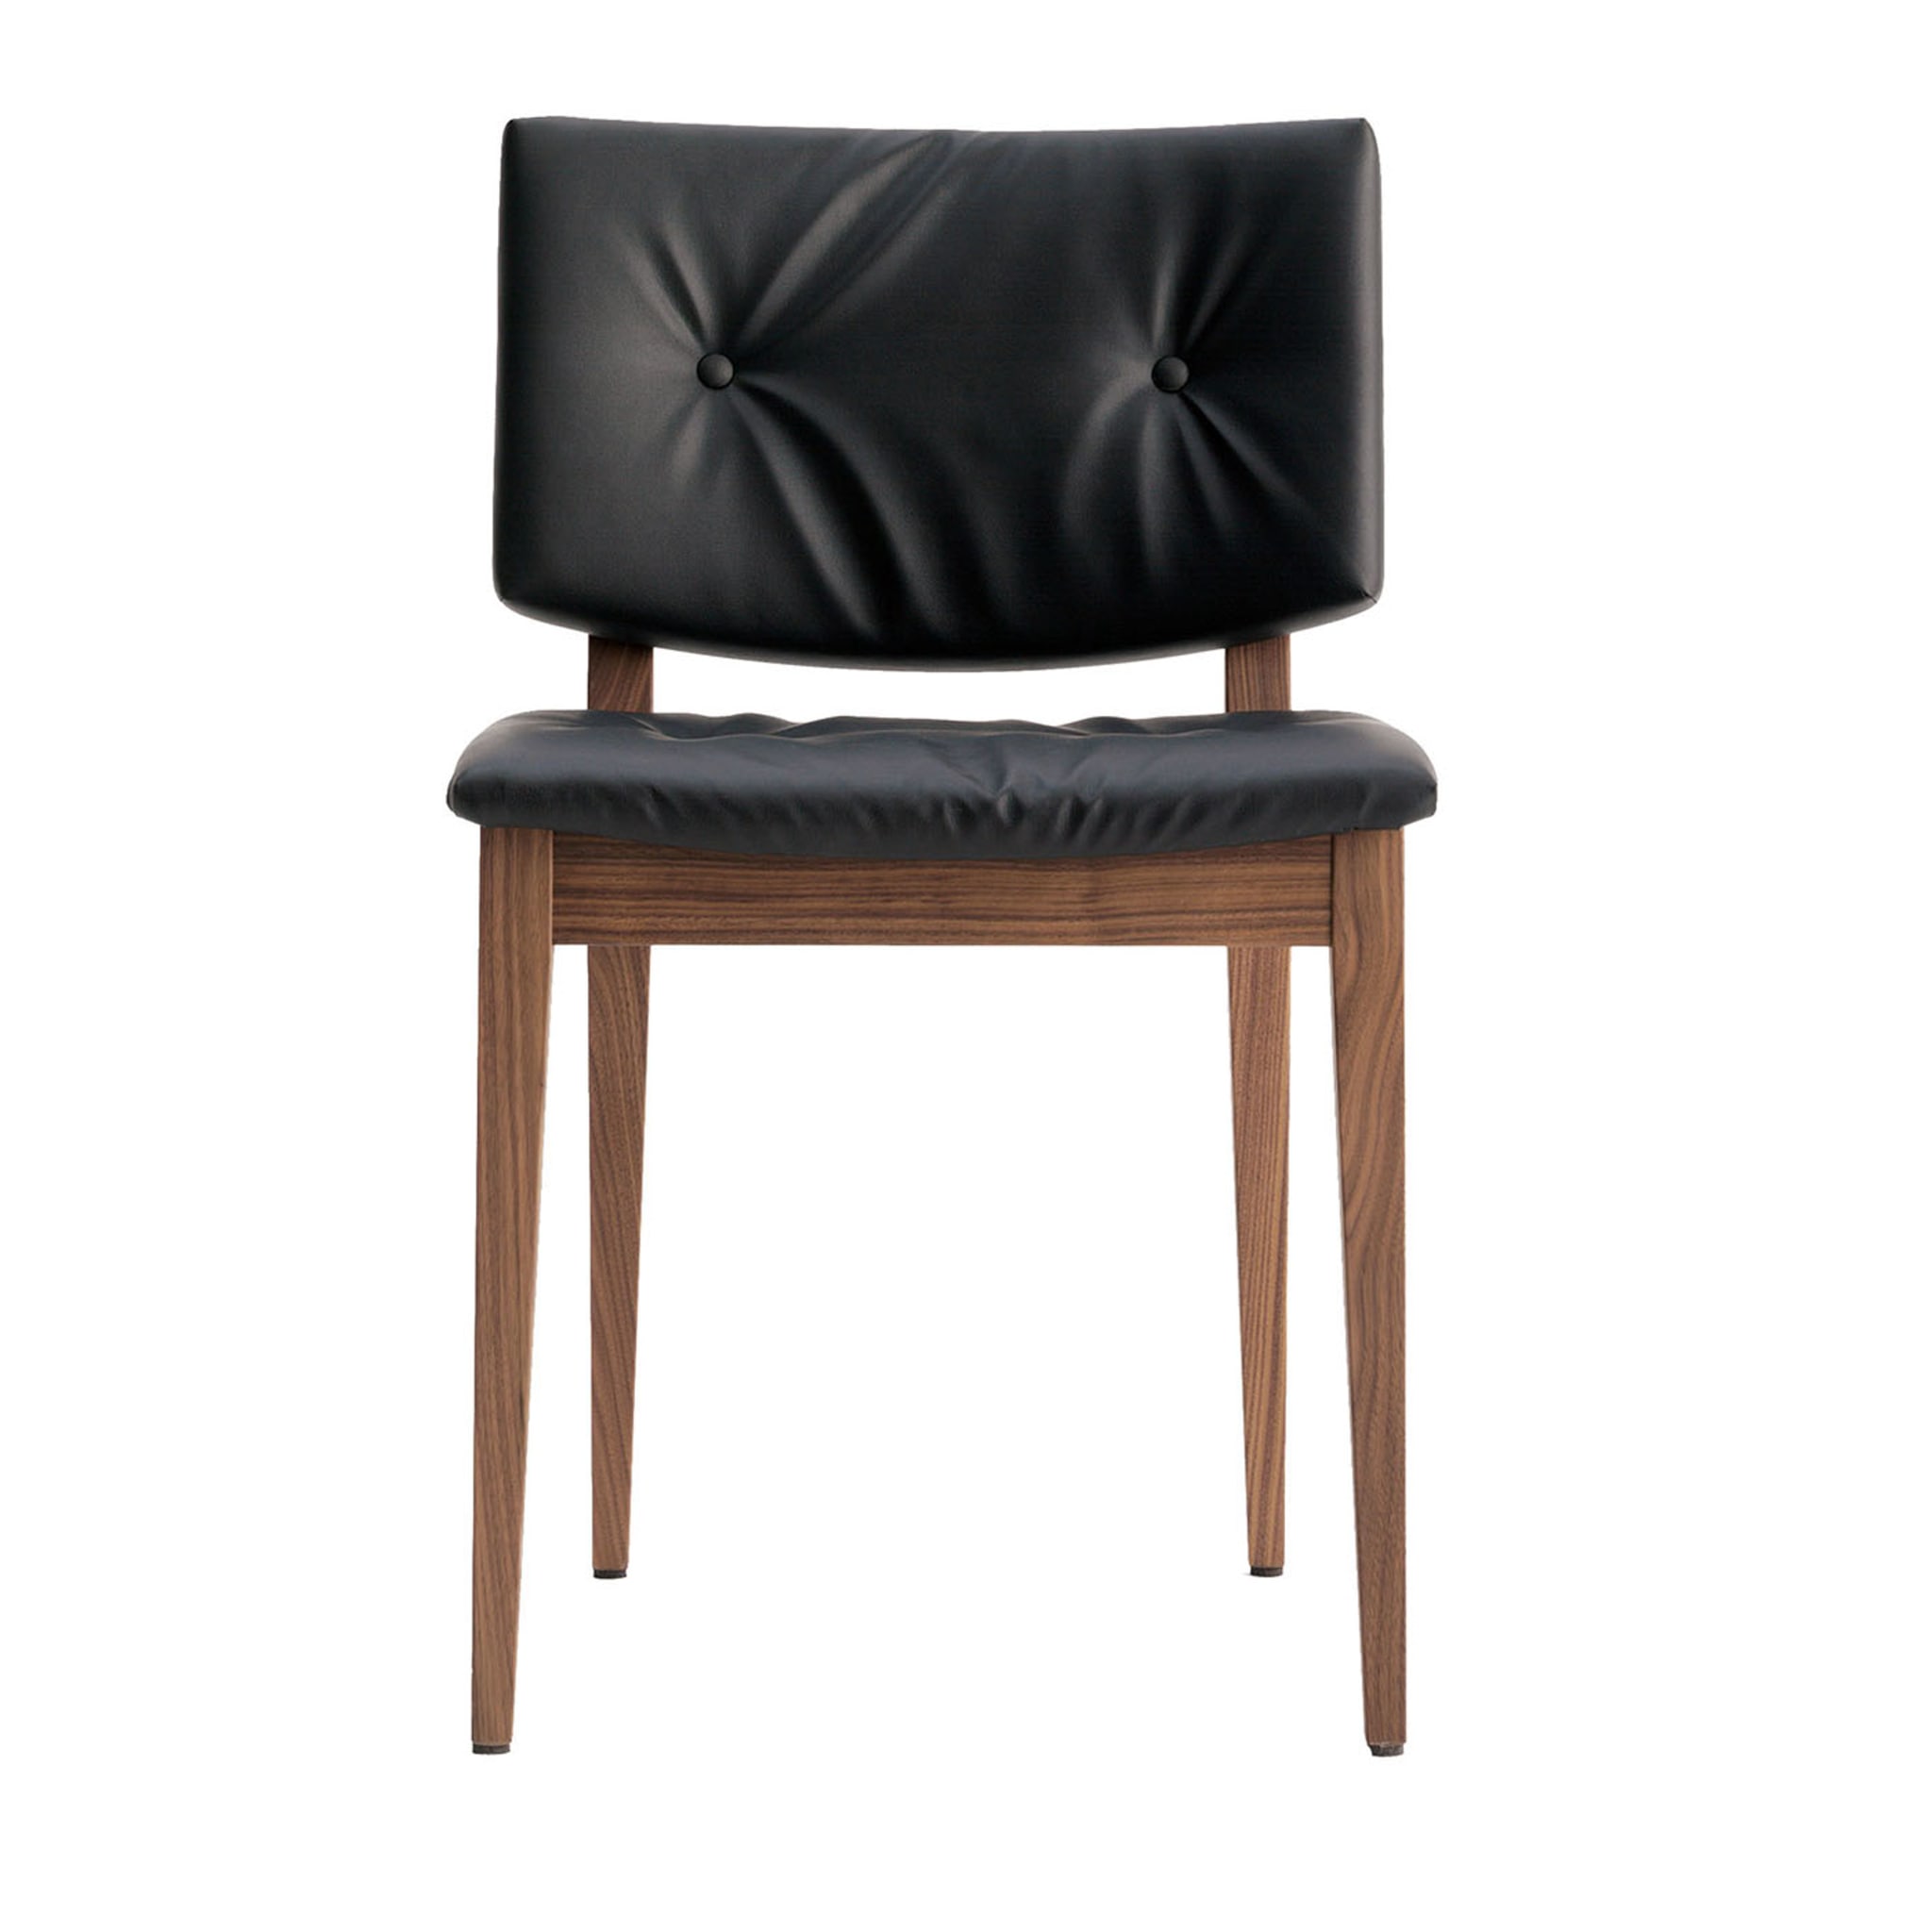 Eileen Small Brown & Black Chair by Werther Toffoloni - Main view